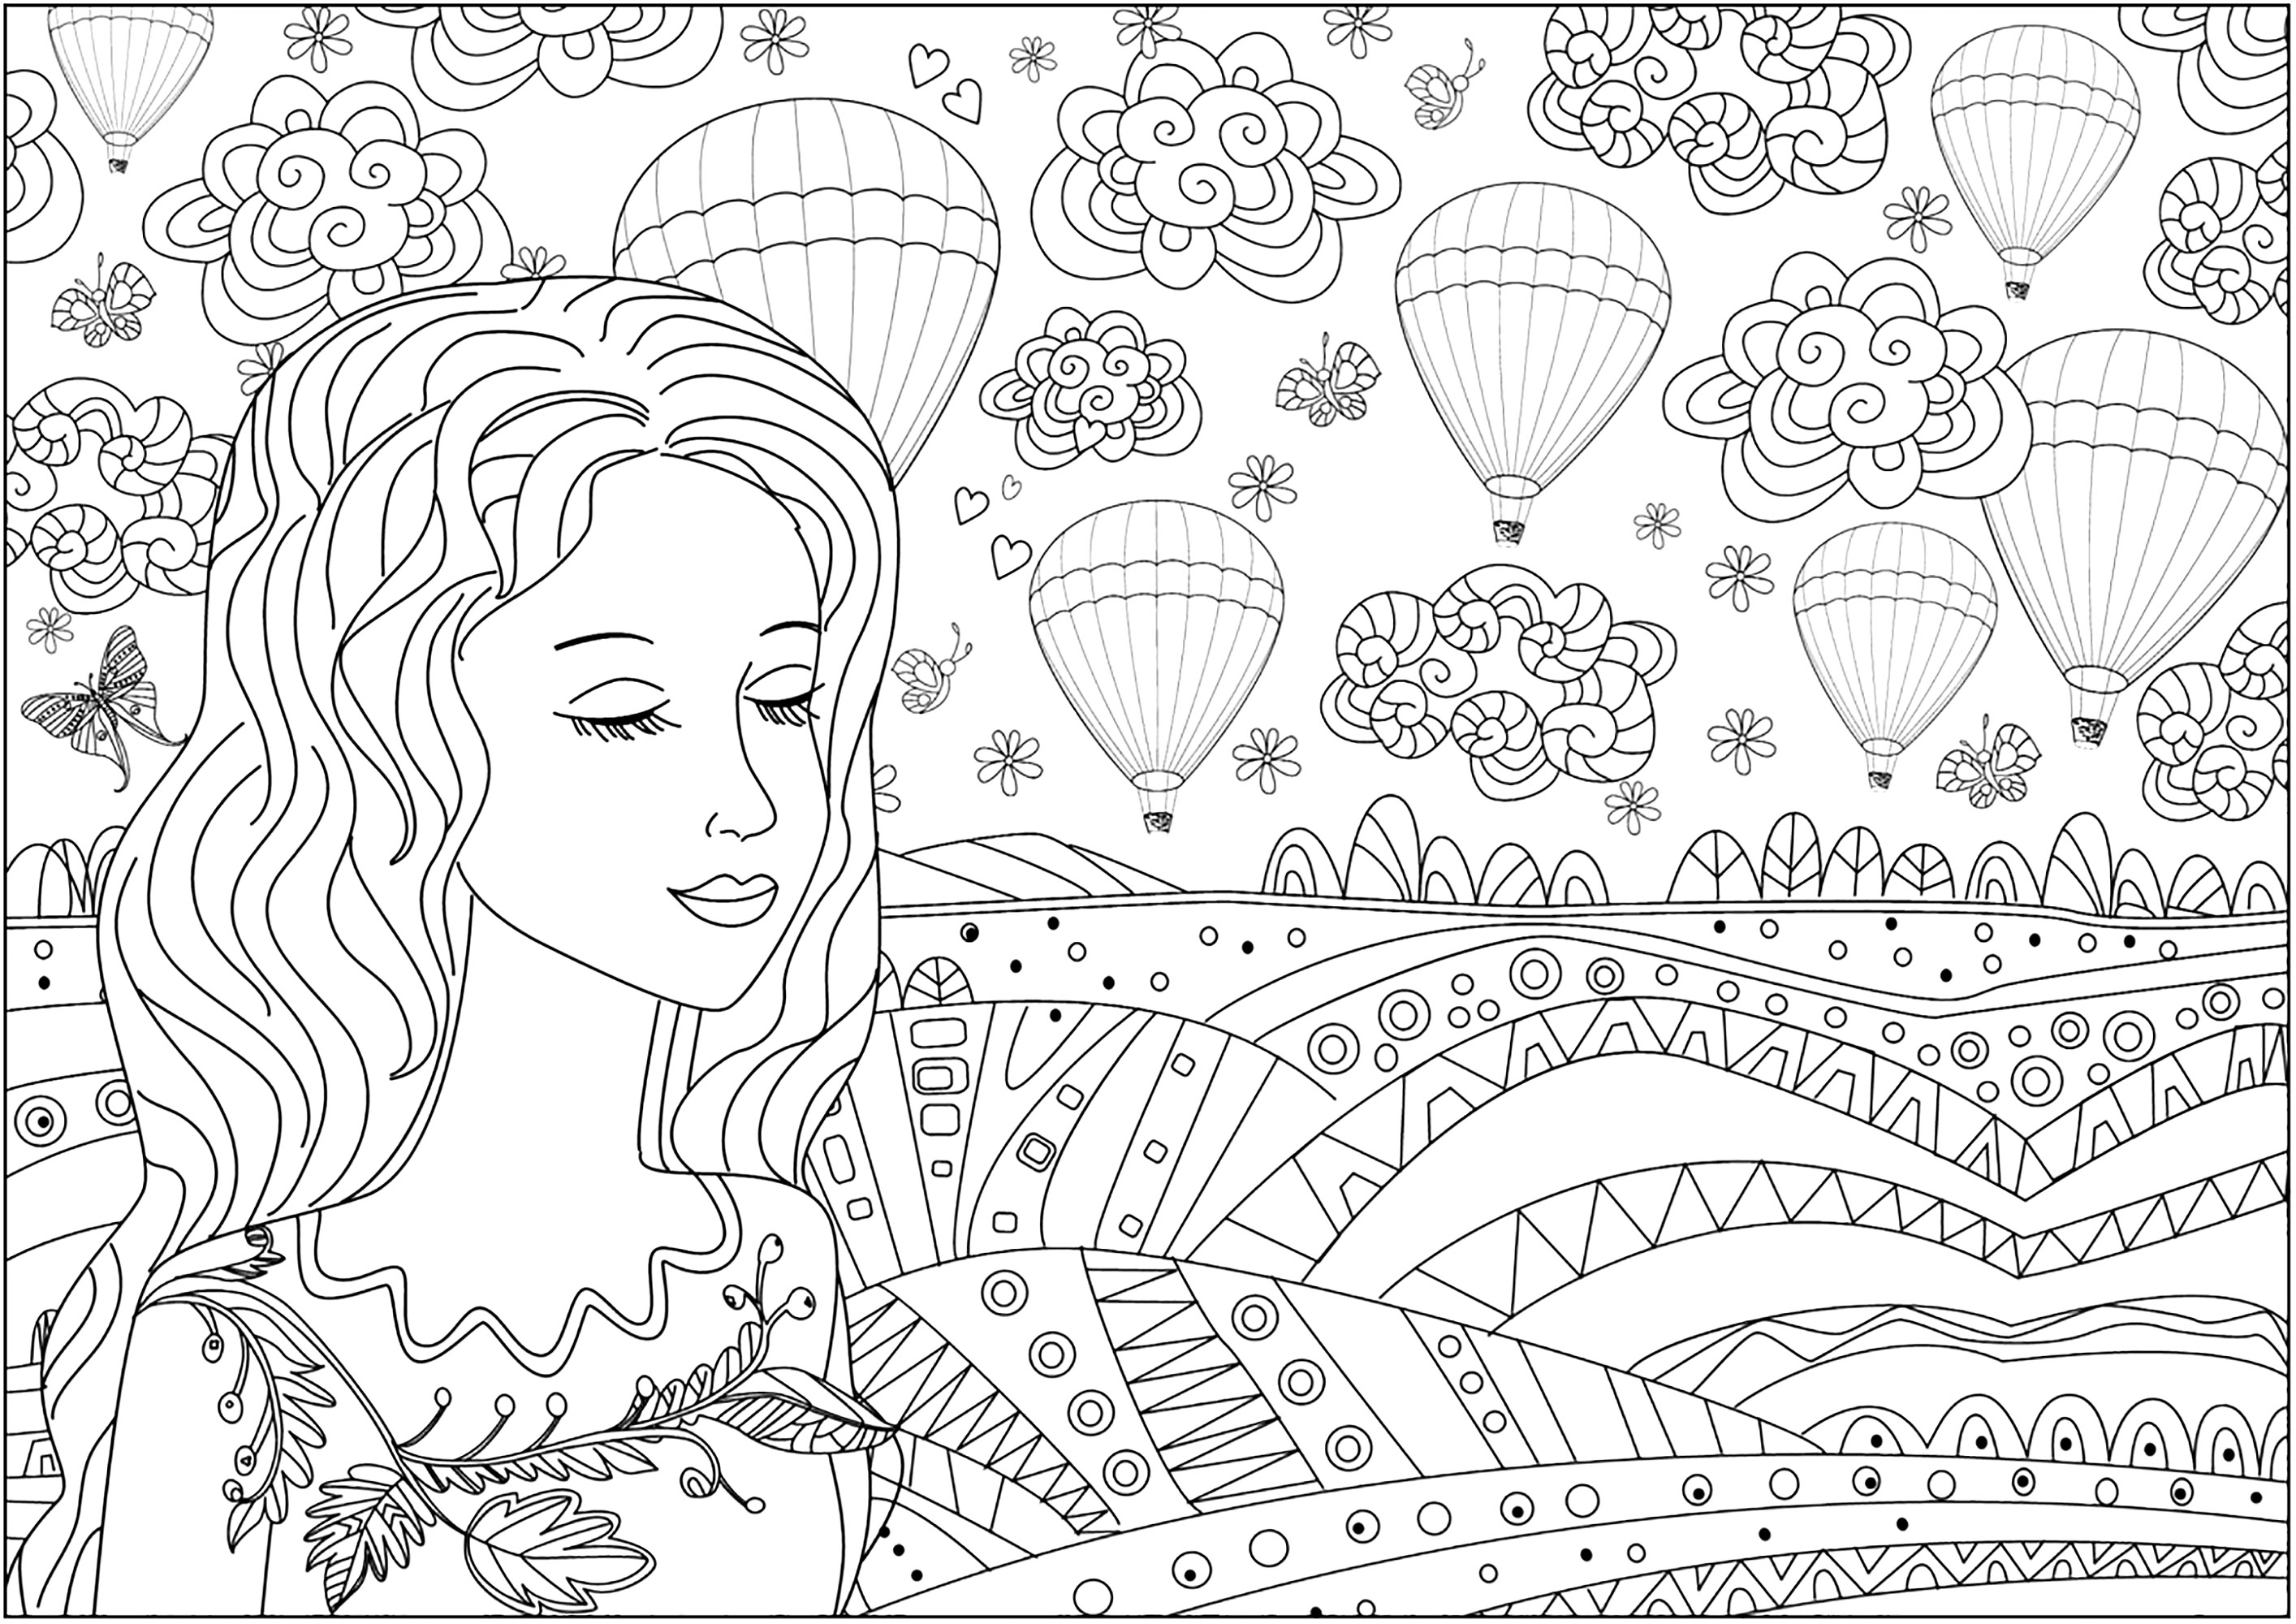 Reflective woman in front of a plain and hot-air balloons in the sky. Many details to color in this pretty and original coloring page.